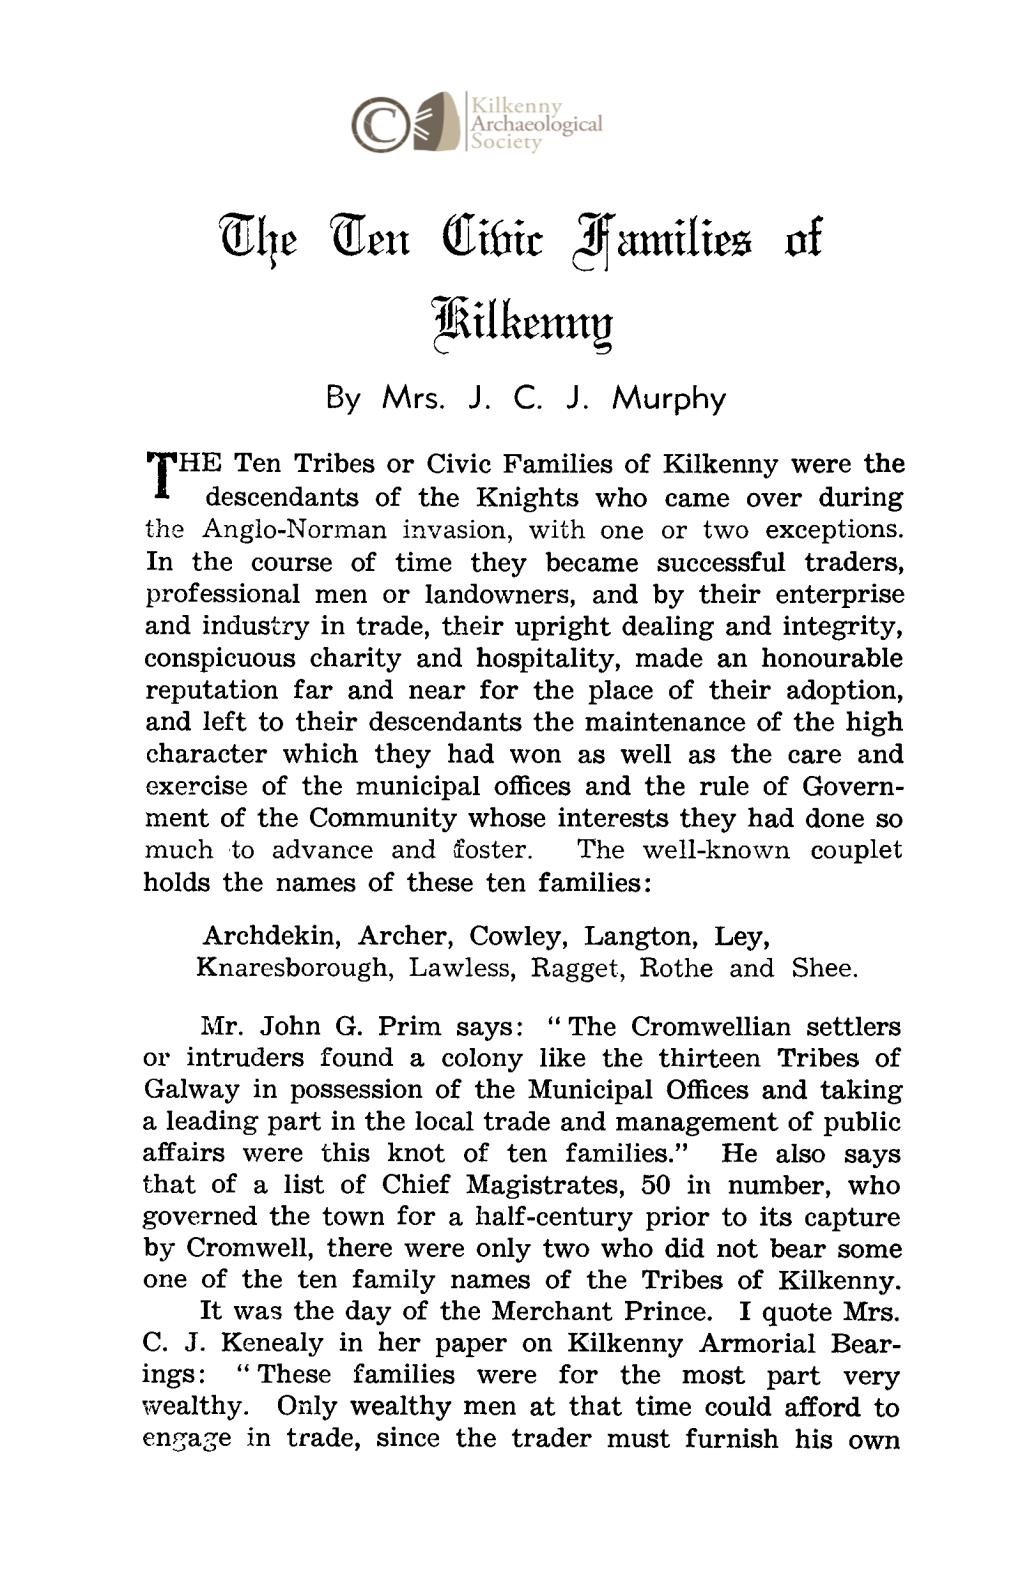 The Ten Civic Families of Kilkenny